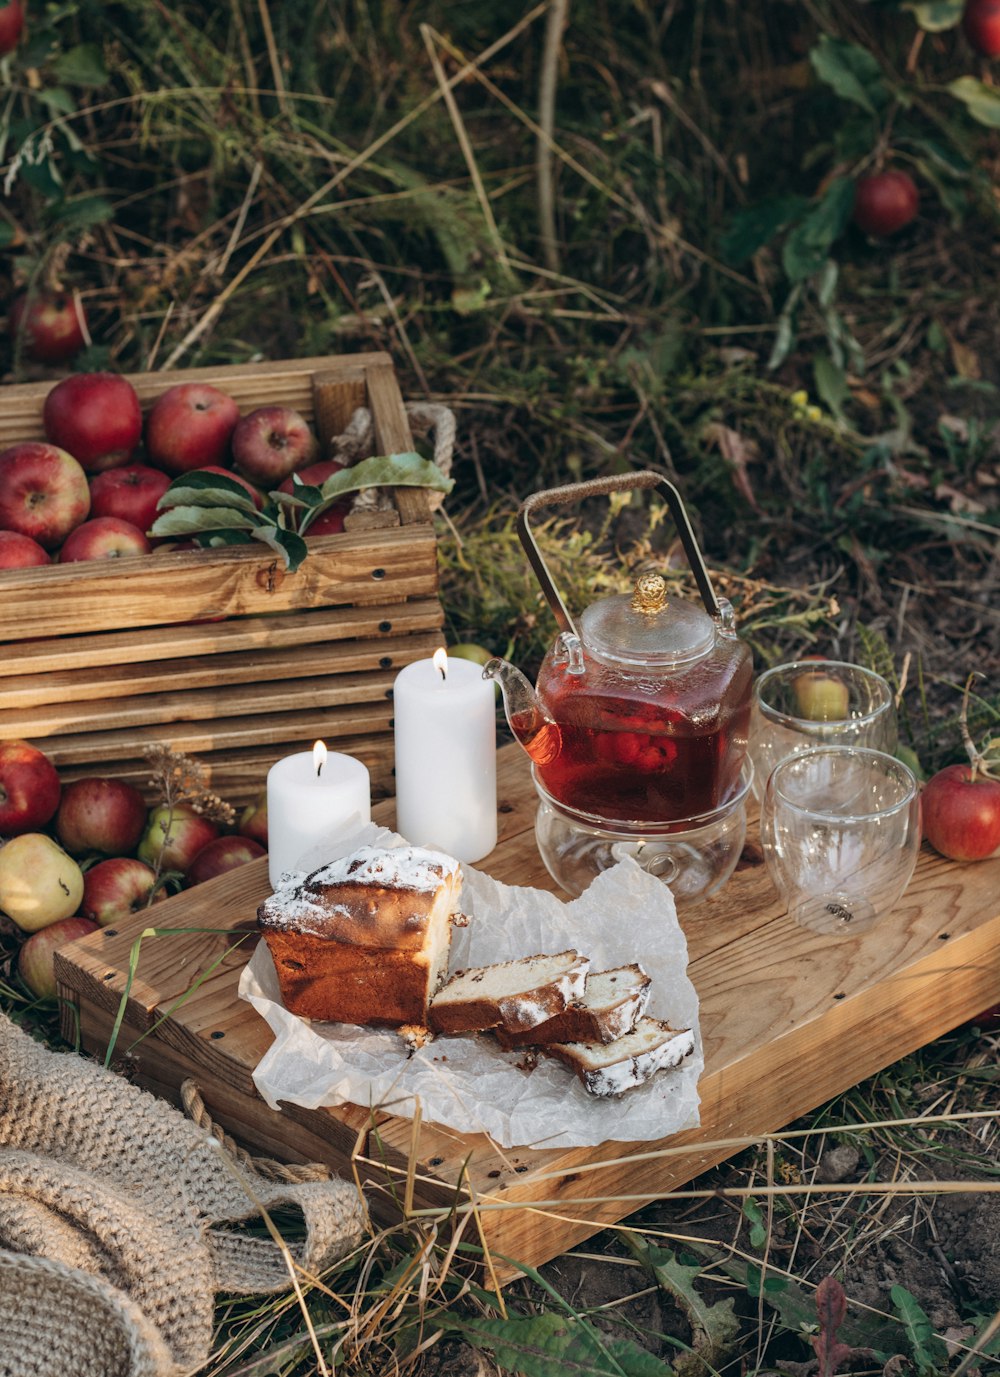 a wooden tray topped with a slice of cake next to a basket of apples